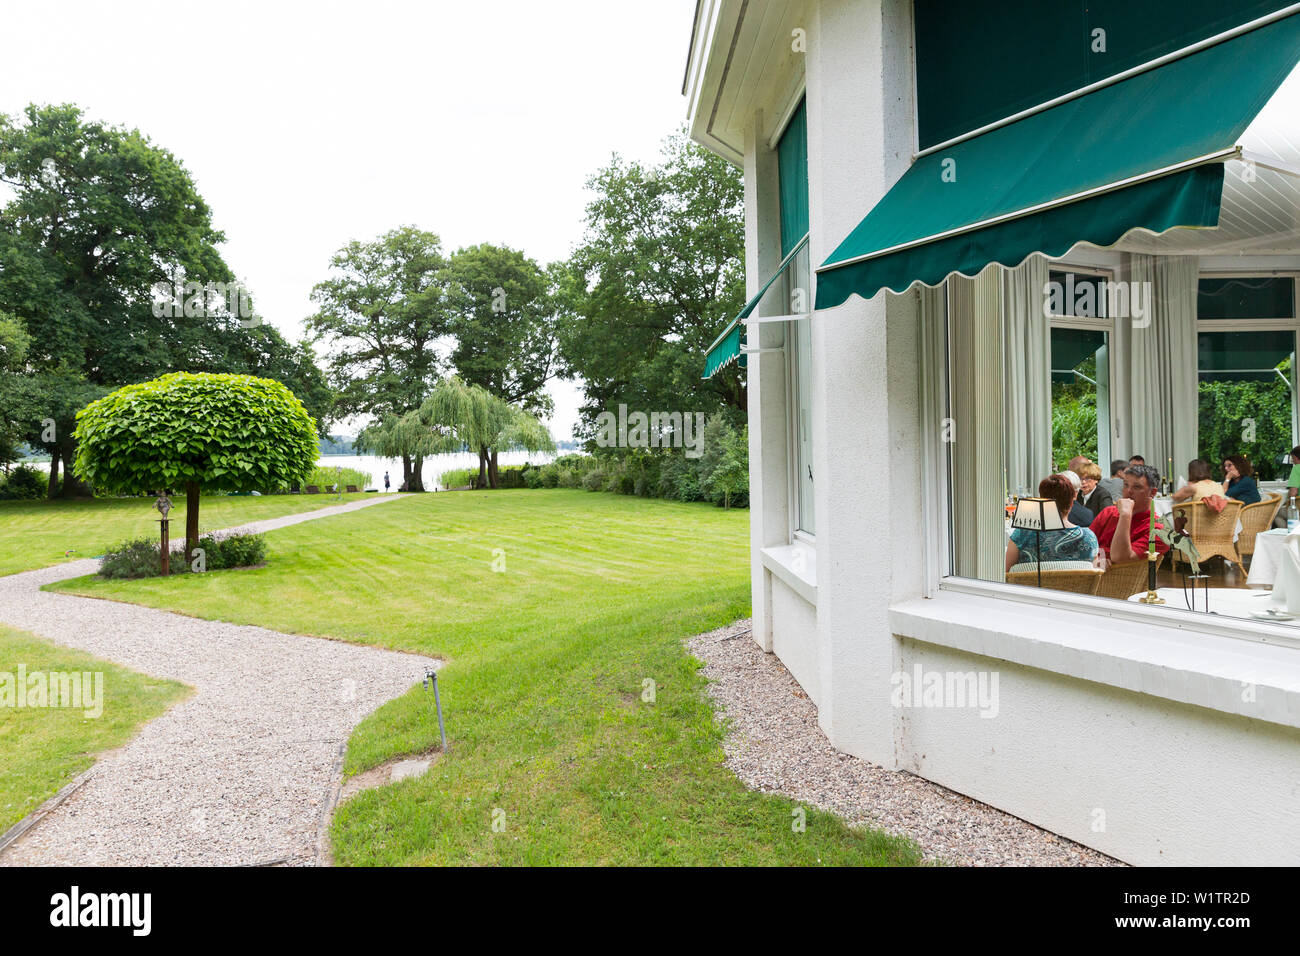 Restaurant at the lake Krakower See, name Ich weiss ein Haus am See, Mecklenburg lakes, Mecklenburg lake district, Krakow, Mecklenburg-West Pomerania, Stock Photo